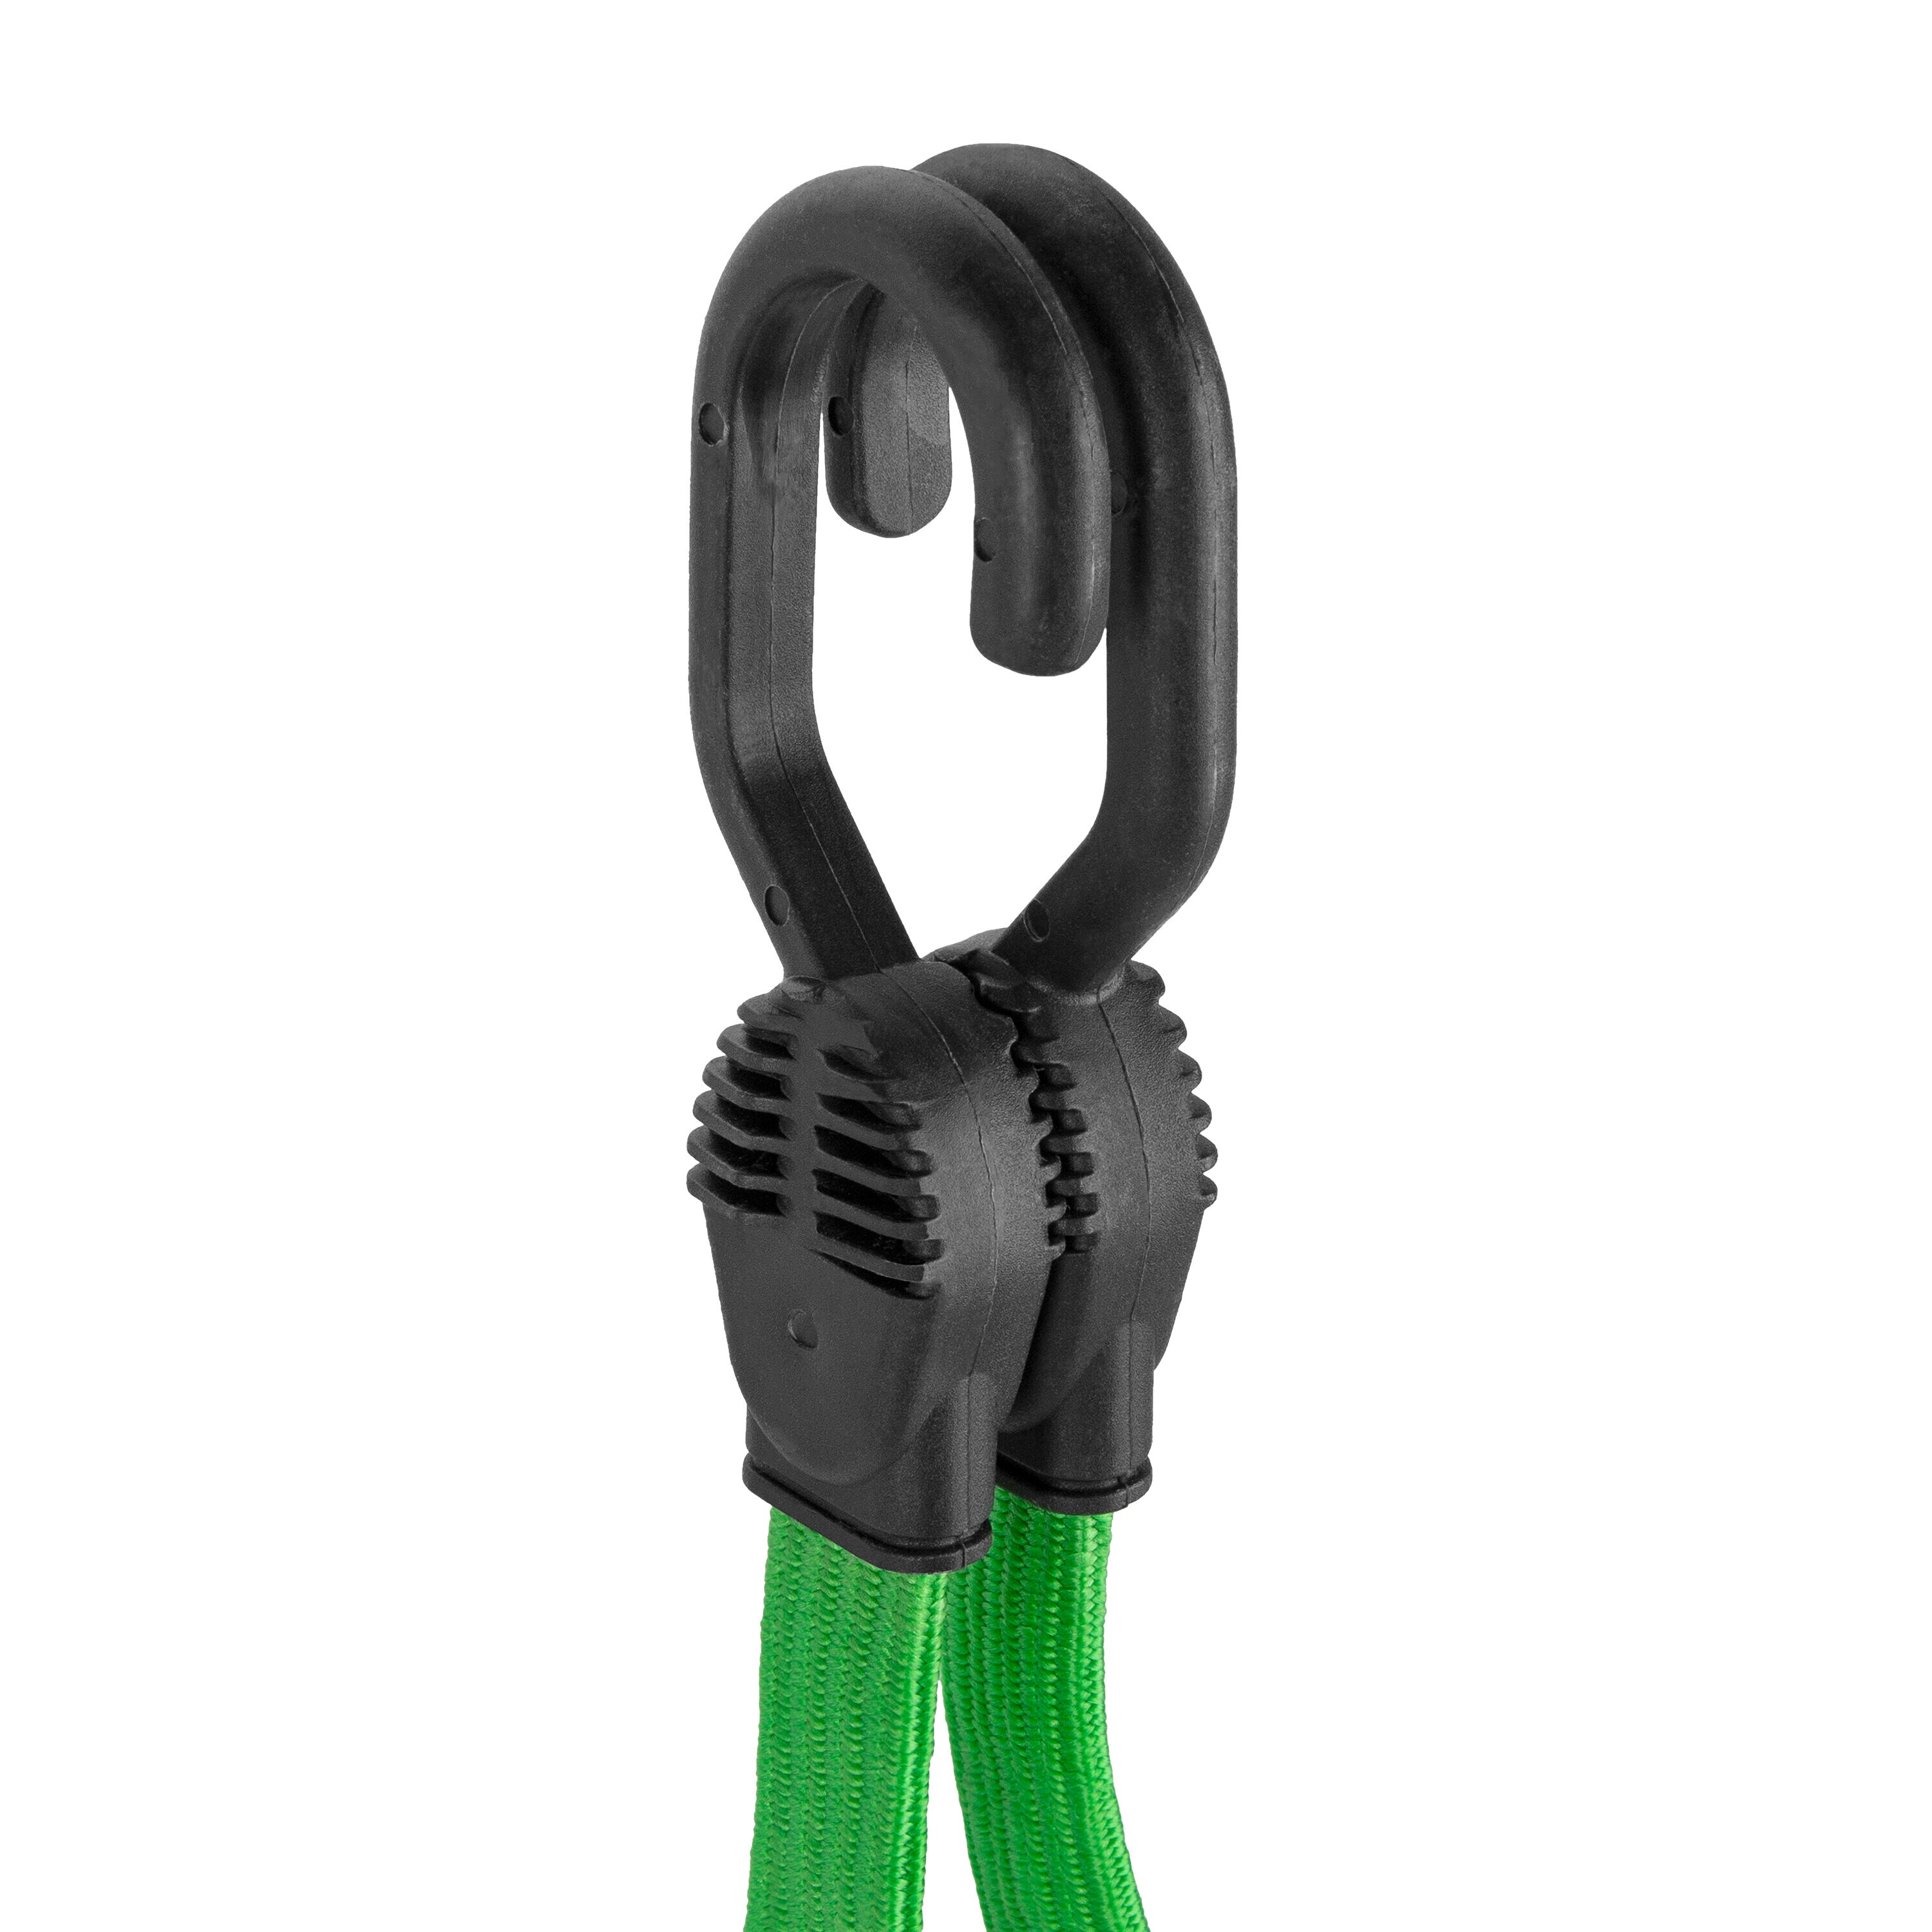 SmartStraps 3-1/3-ft Adjustable Bungee Cord in the Bungee Cords department  at